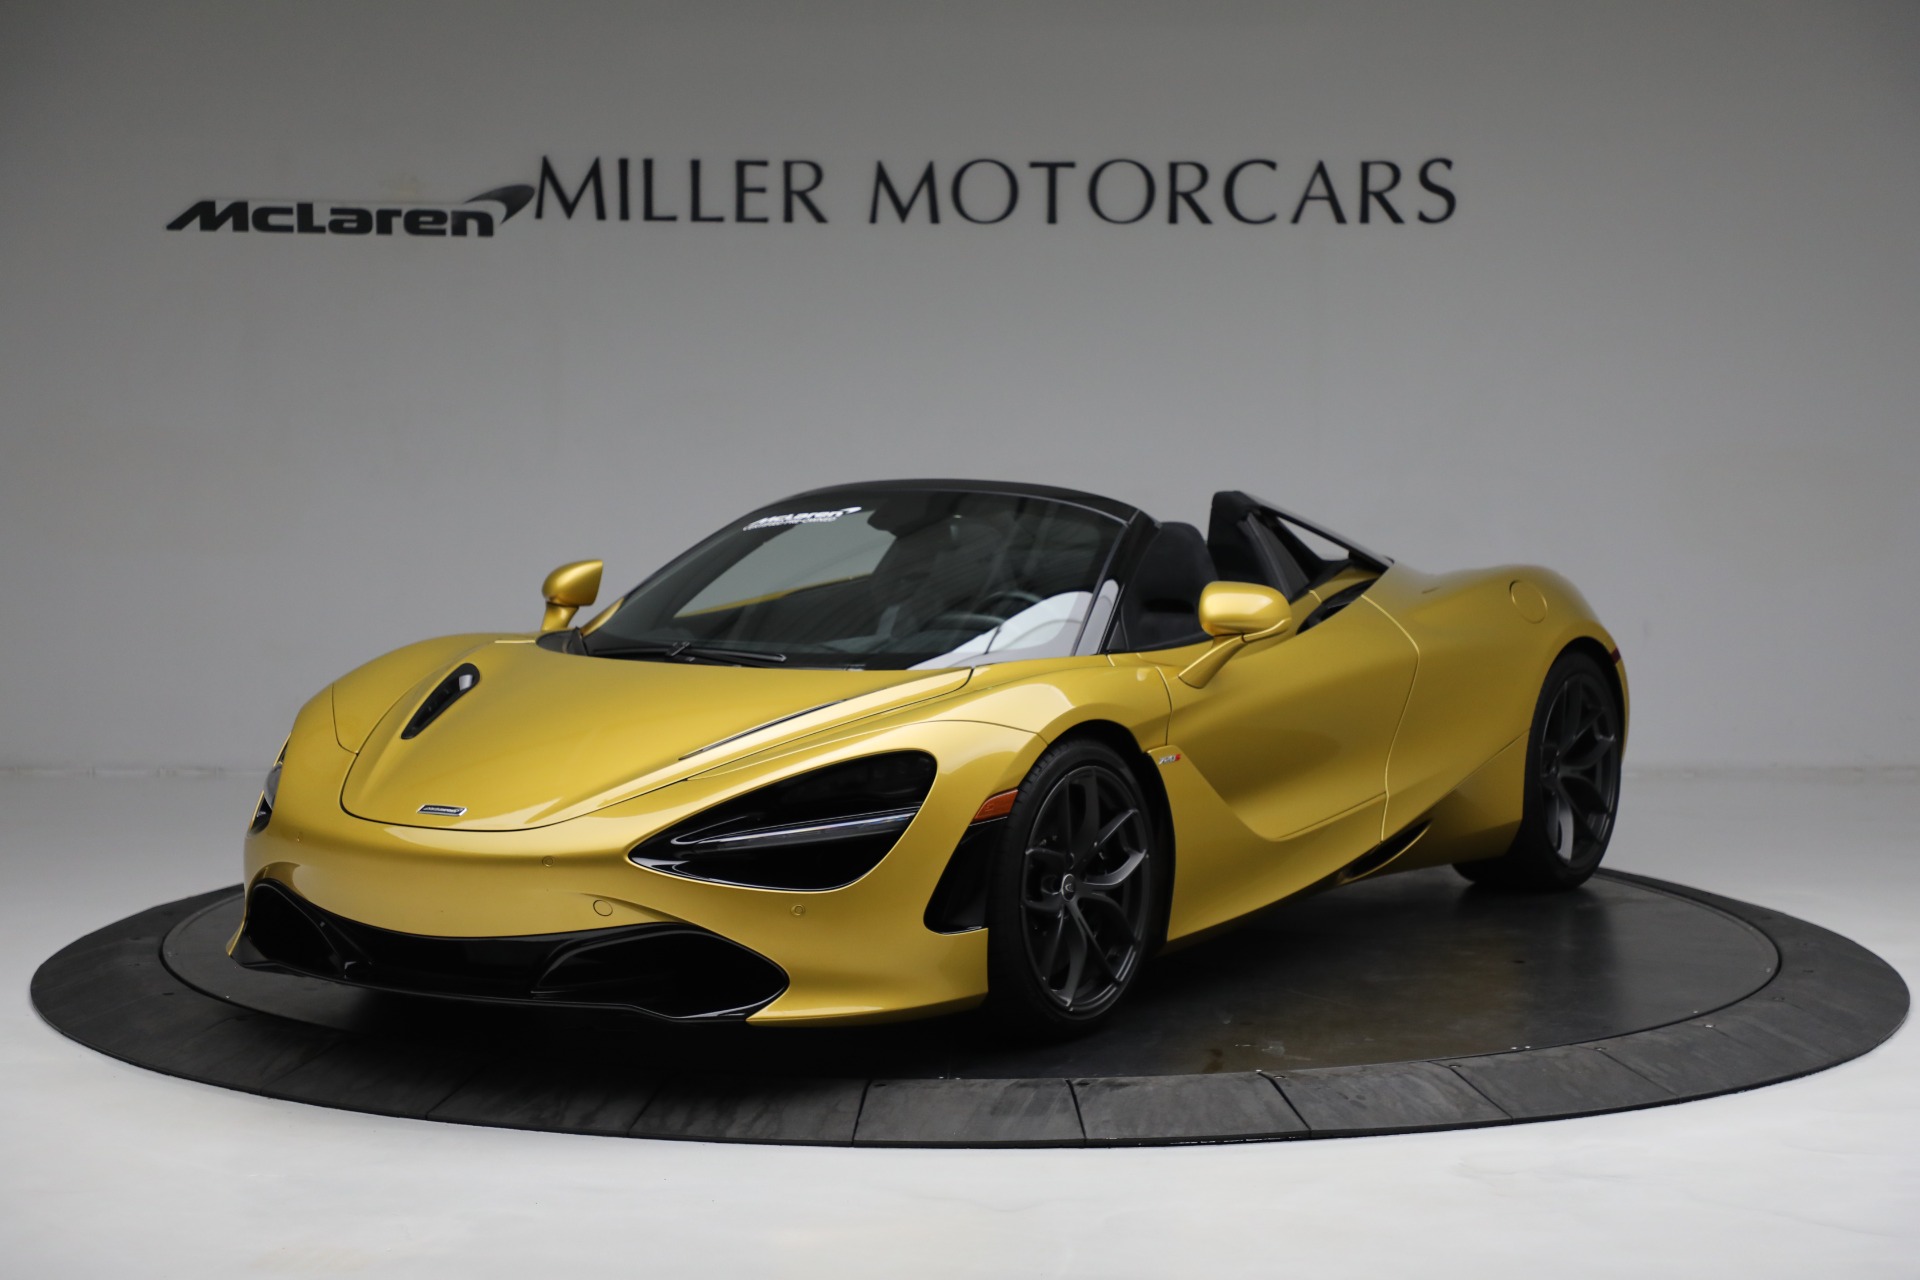 Used 2020 McLaren 720S Spider for sale $317,900 at Bentley Greenwich in Greenwich CT 06830 1